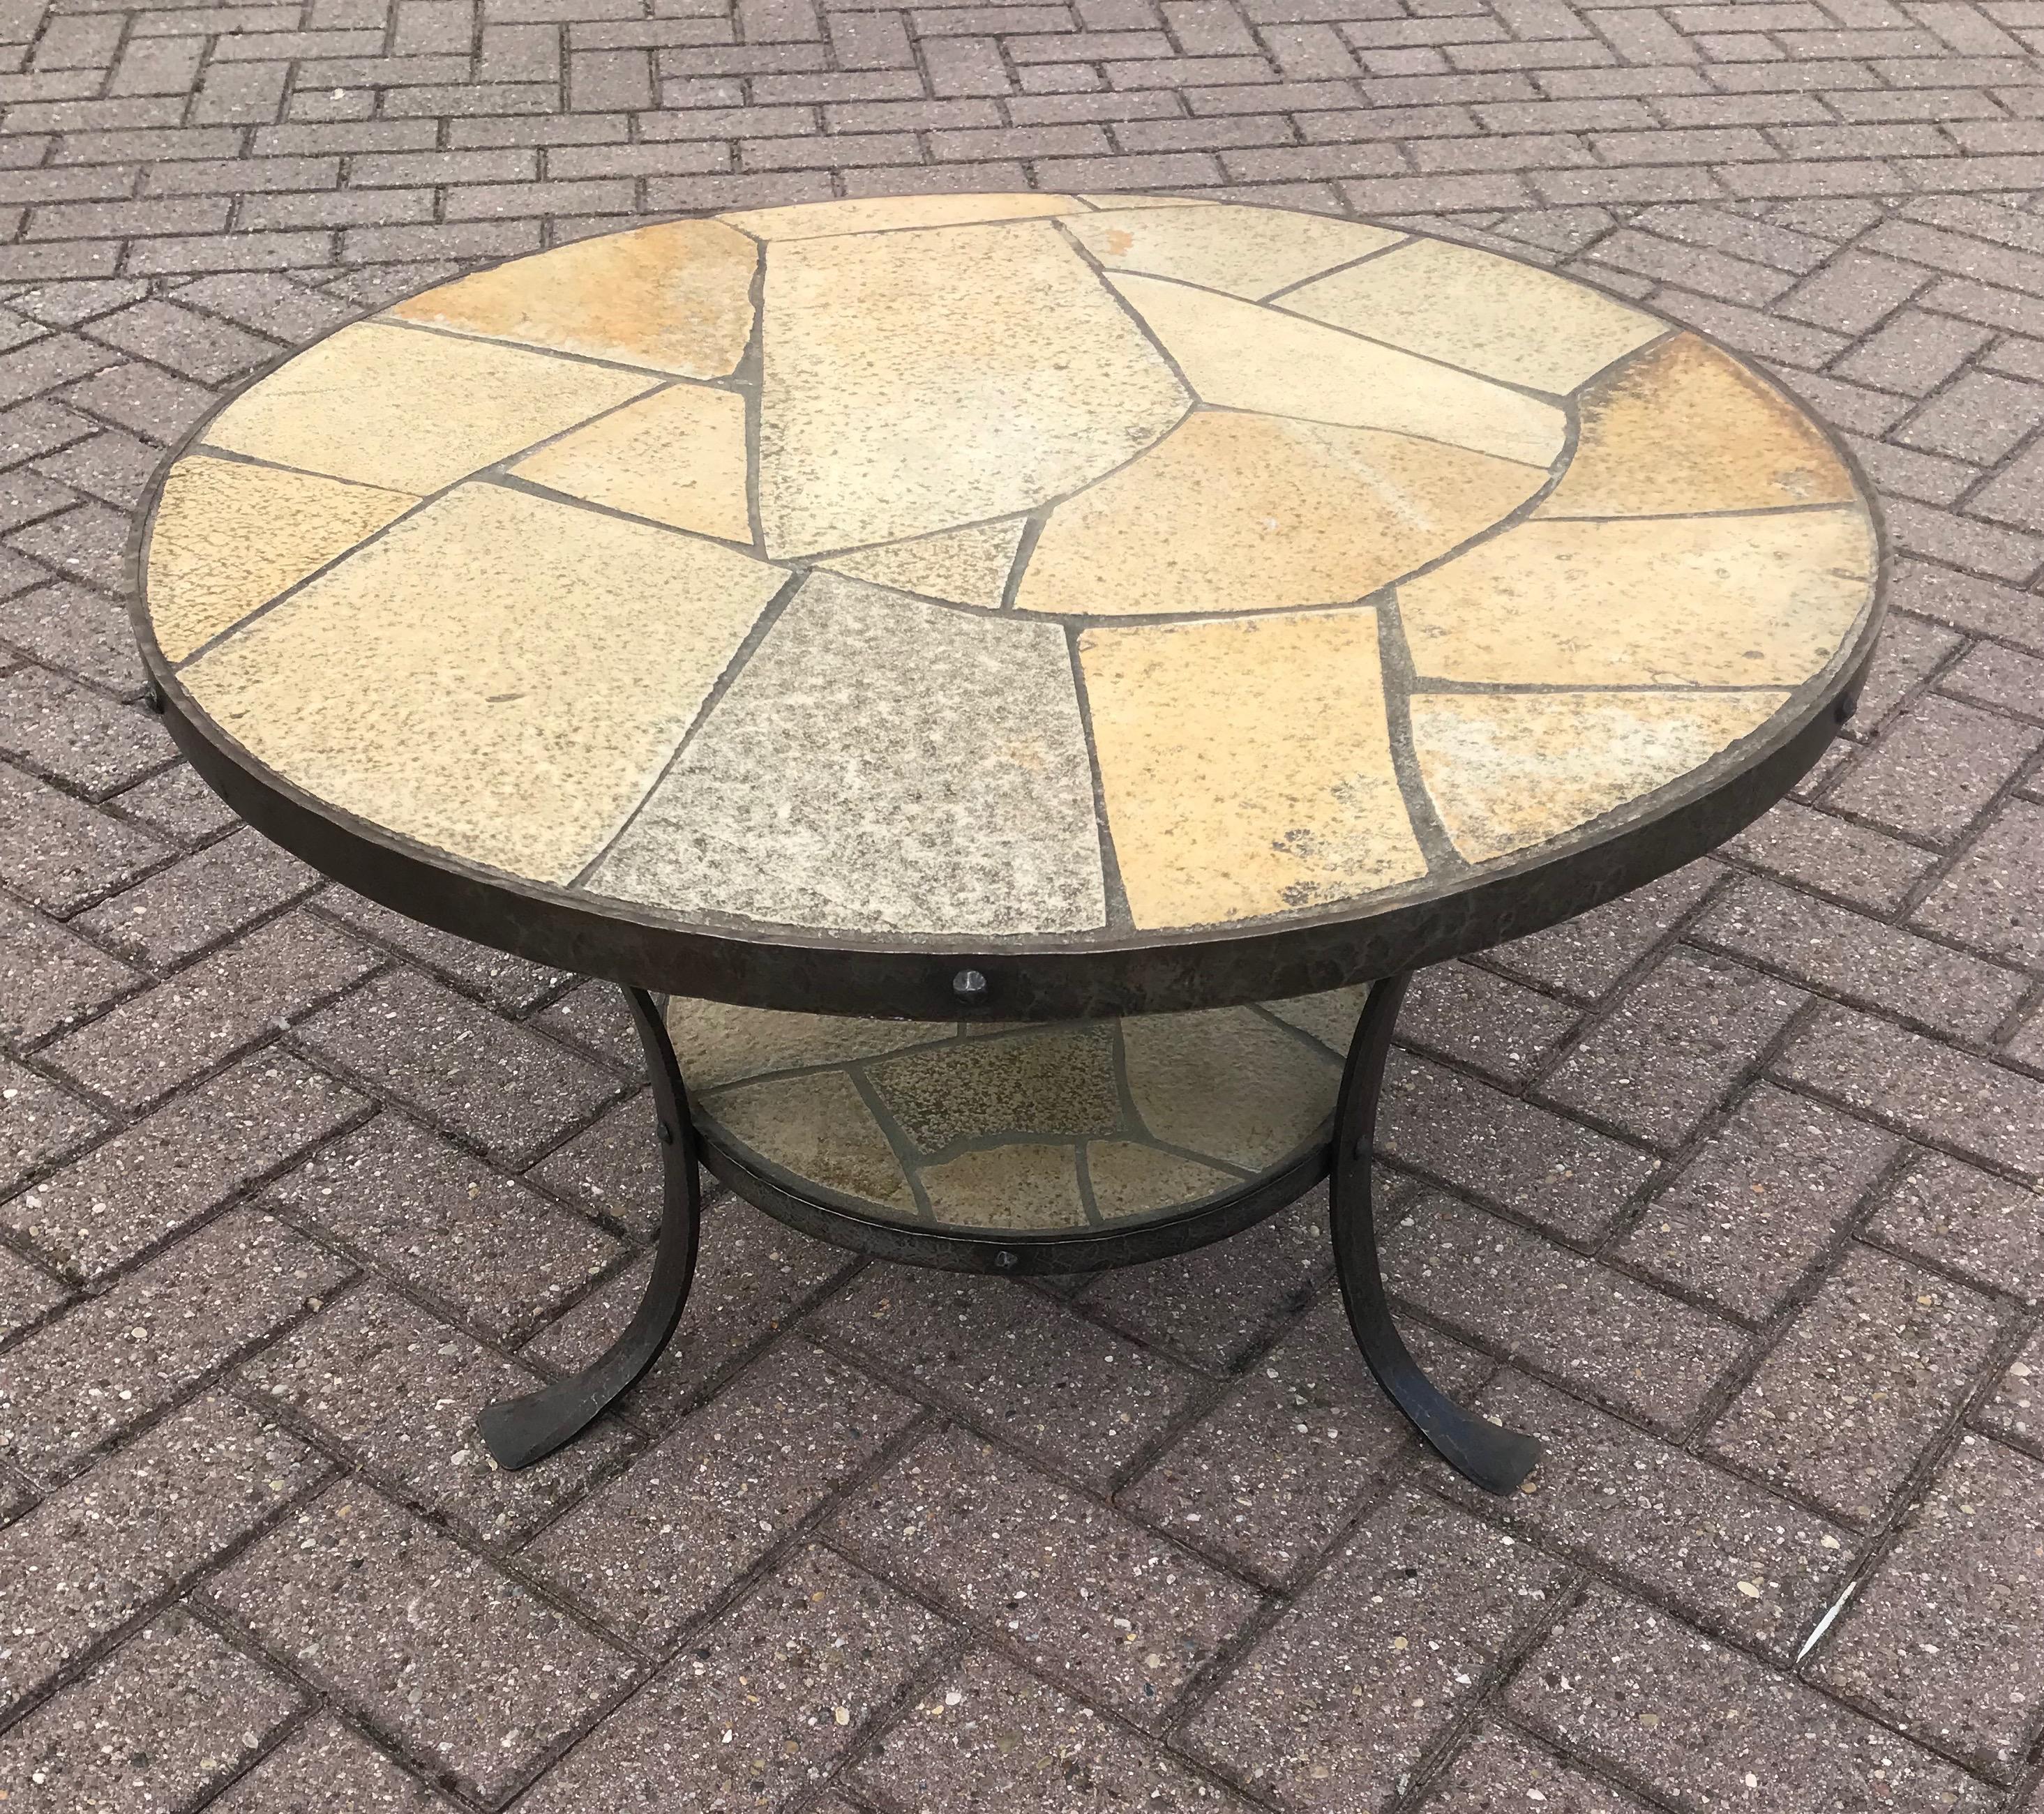 Stunning handcrafted round shape coffee table.

This super sturdy and highly stylish wrought iron table with slate stone top and first tier is in excellent condition. The quality hand-forged frames around the stone inlaid tiers are beautiful and the